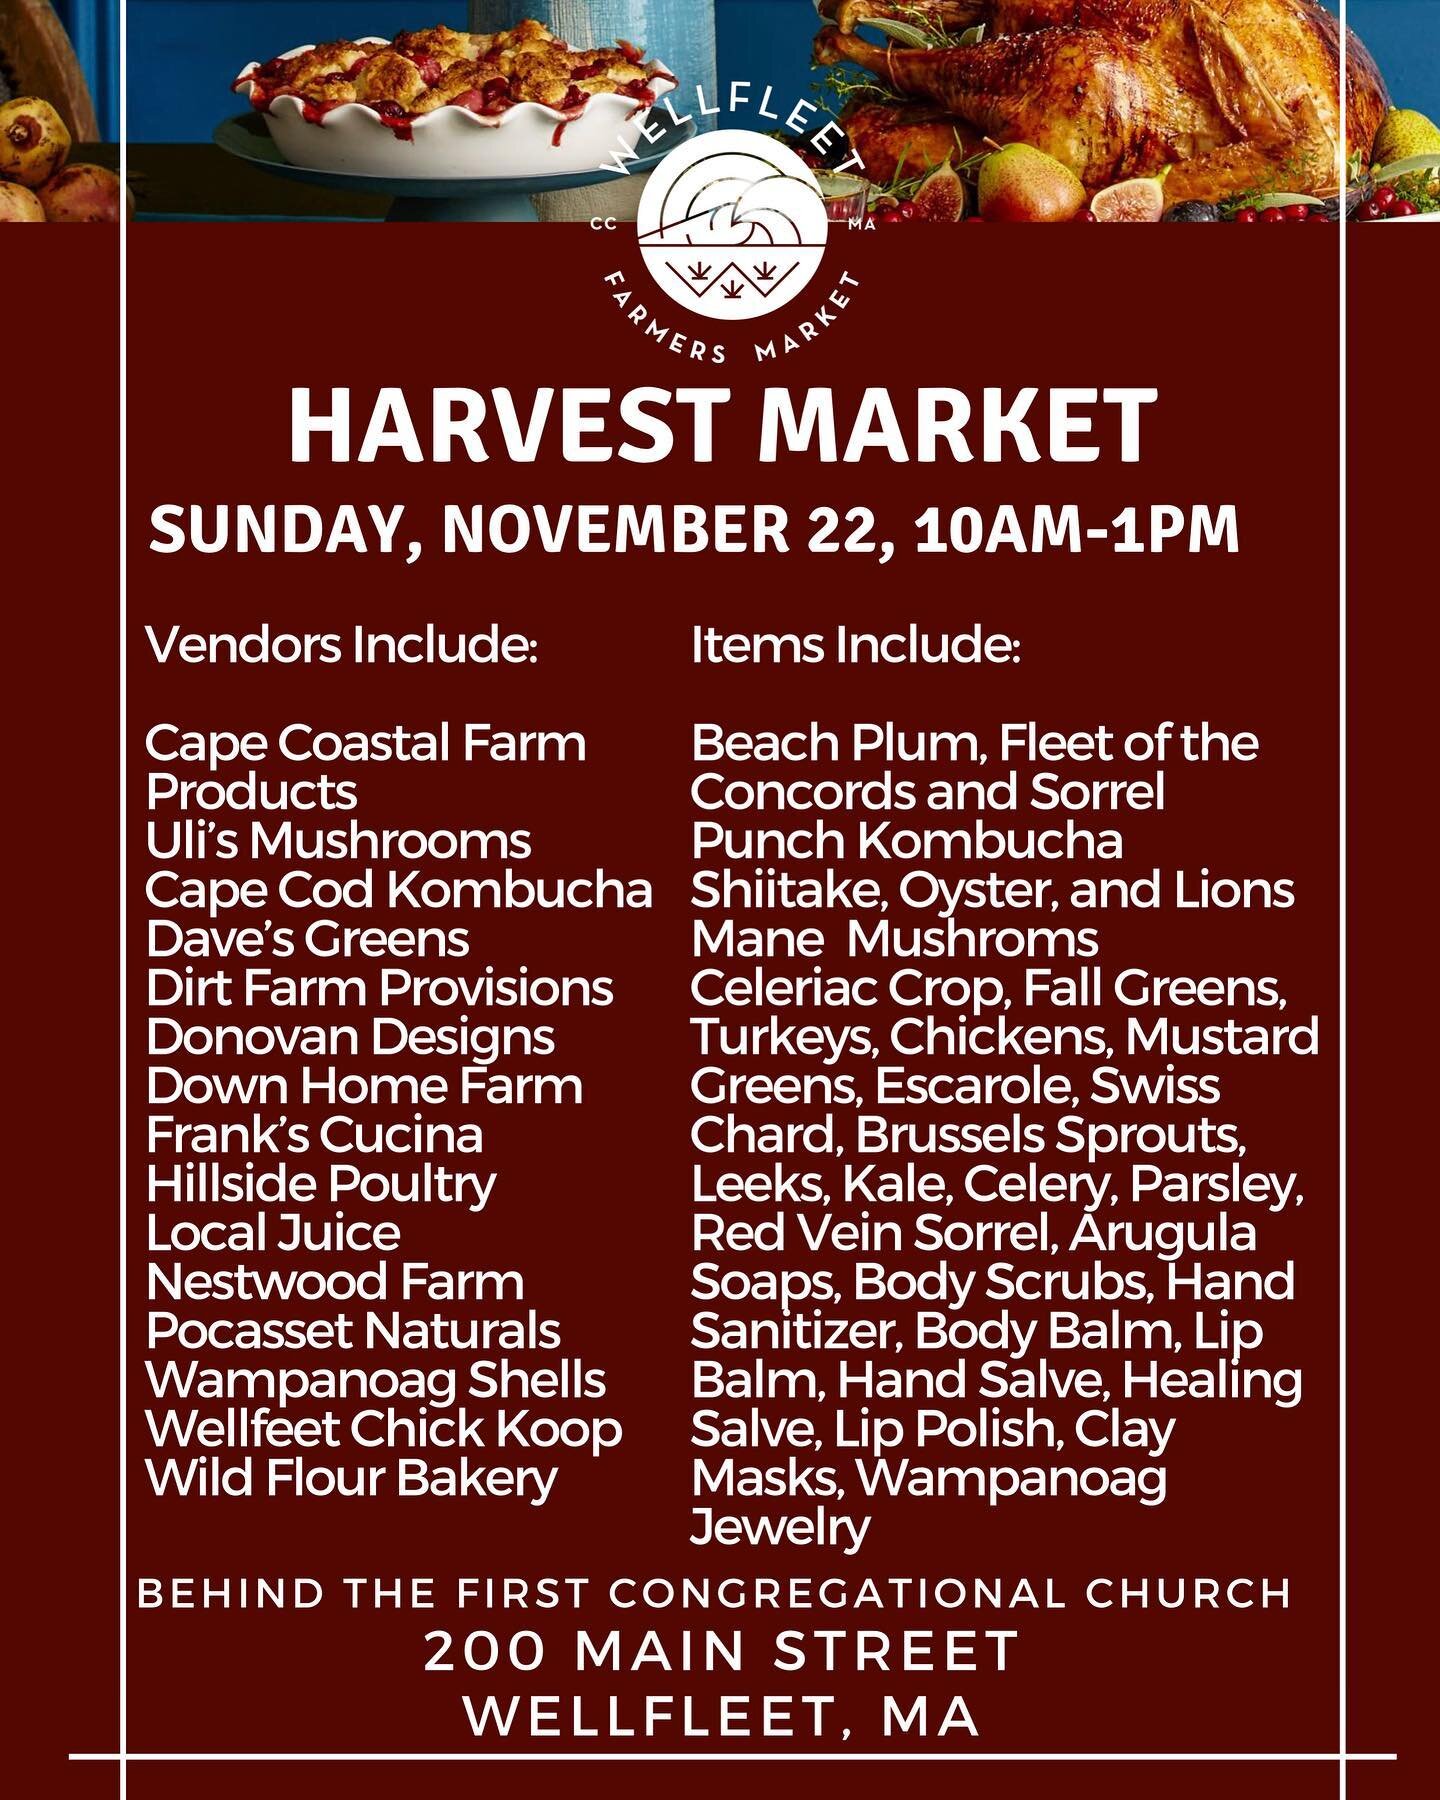 A taste of what you&rsquo;ll find today at the Harvest Market!